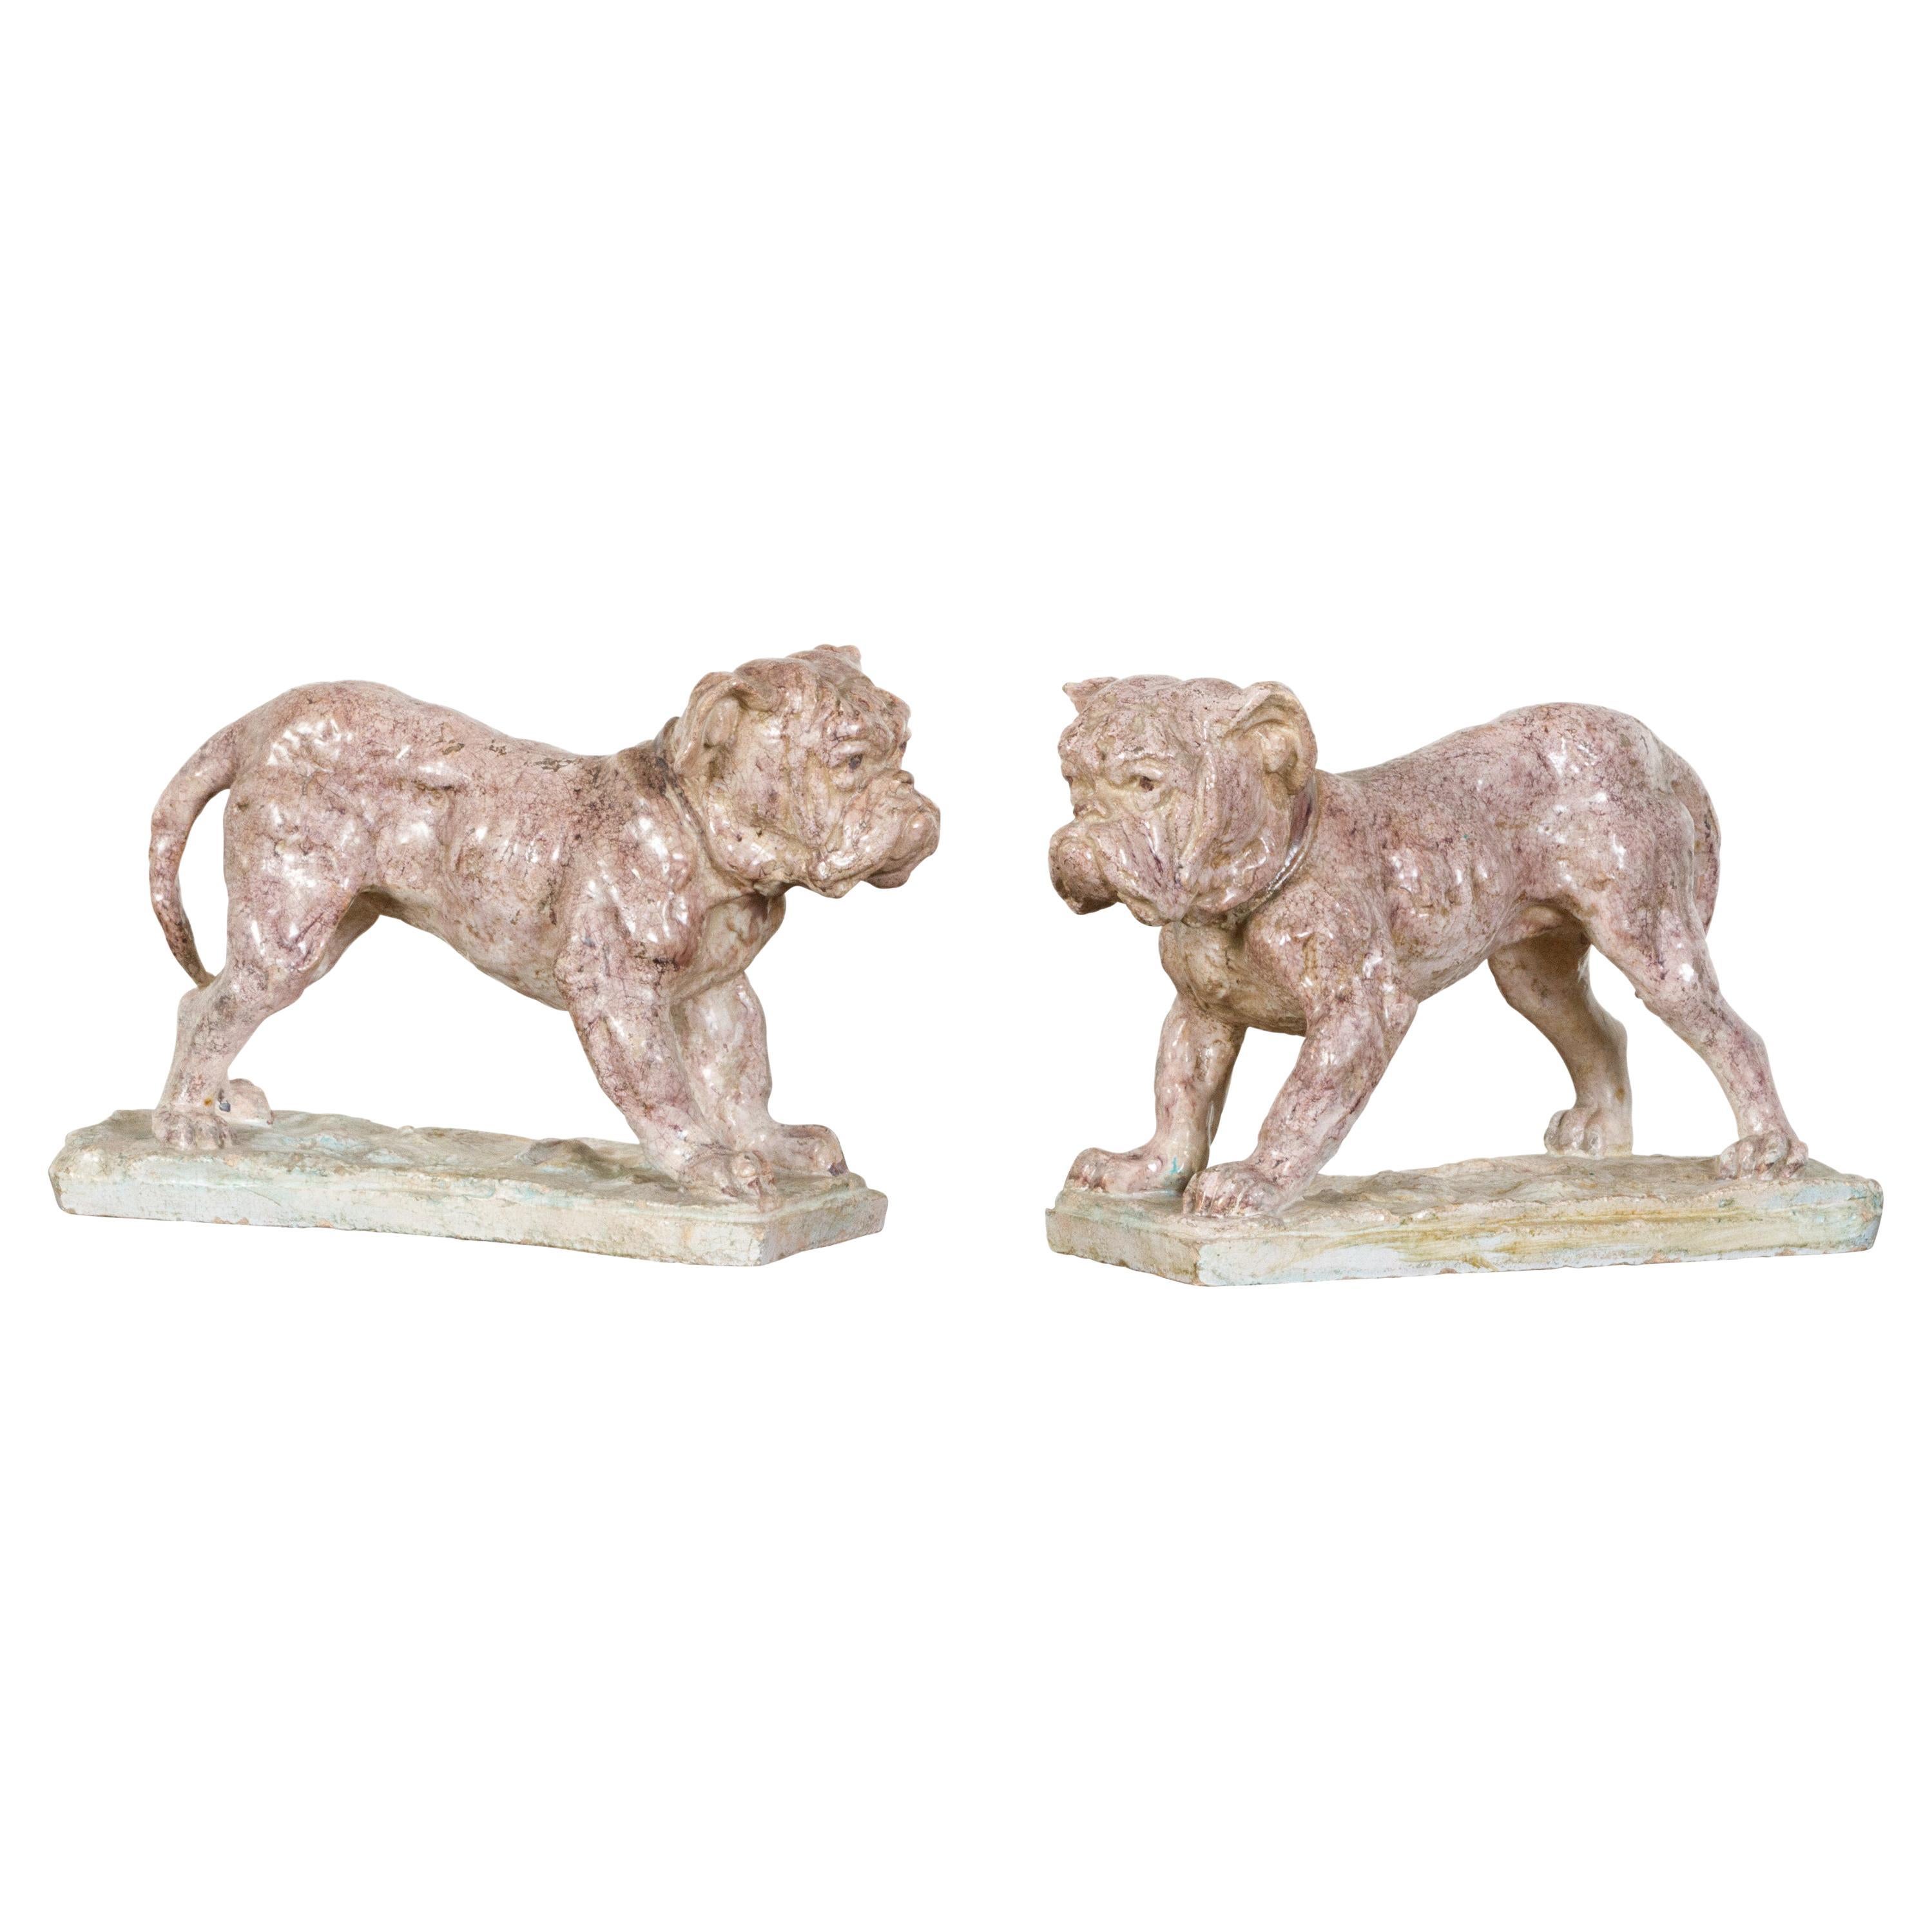 Pair of 19th Century French Faience Bulldog Sculptures on Terracotta Bases For Sale